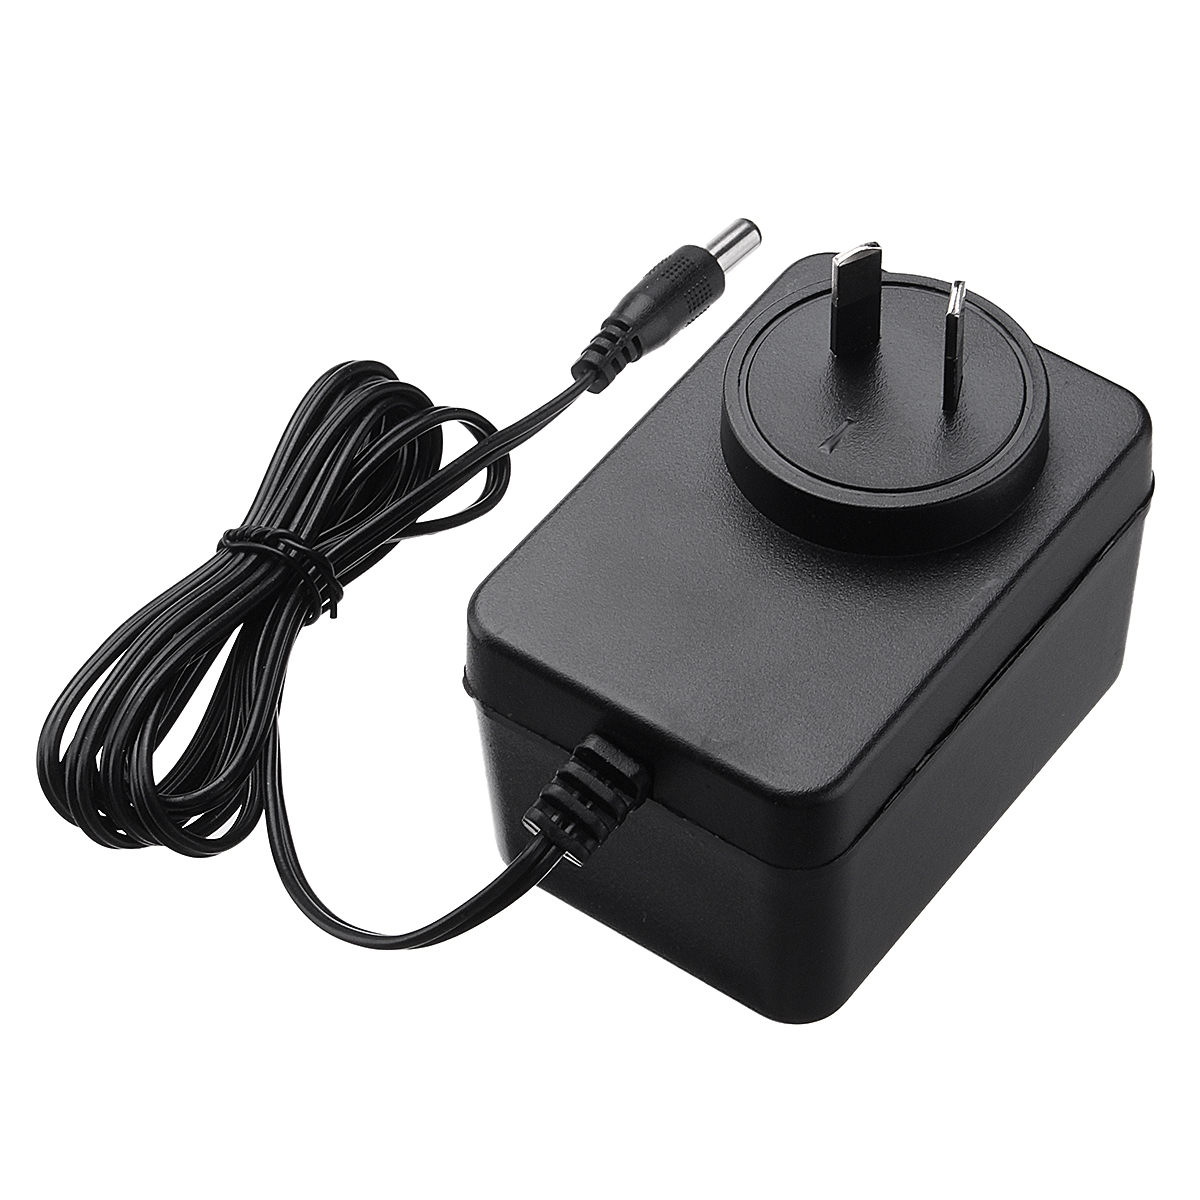 

12V 1000mA Battery Charger AC Adapter For Kids Electric Ride On Car Bike Scooter Buggy Quad